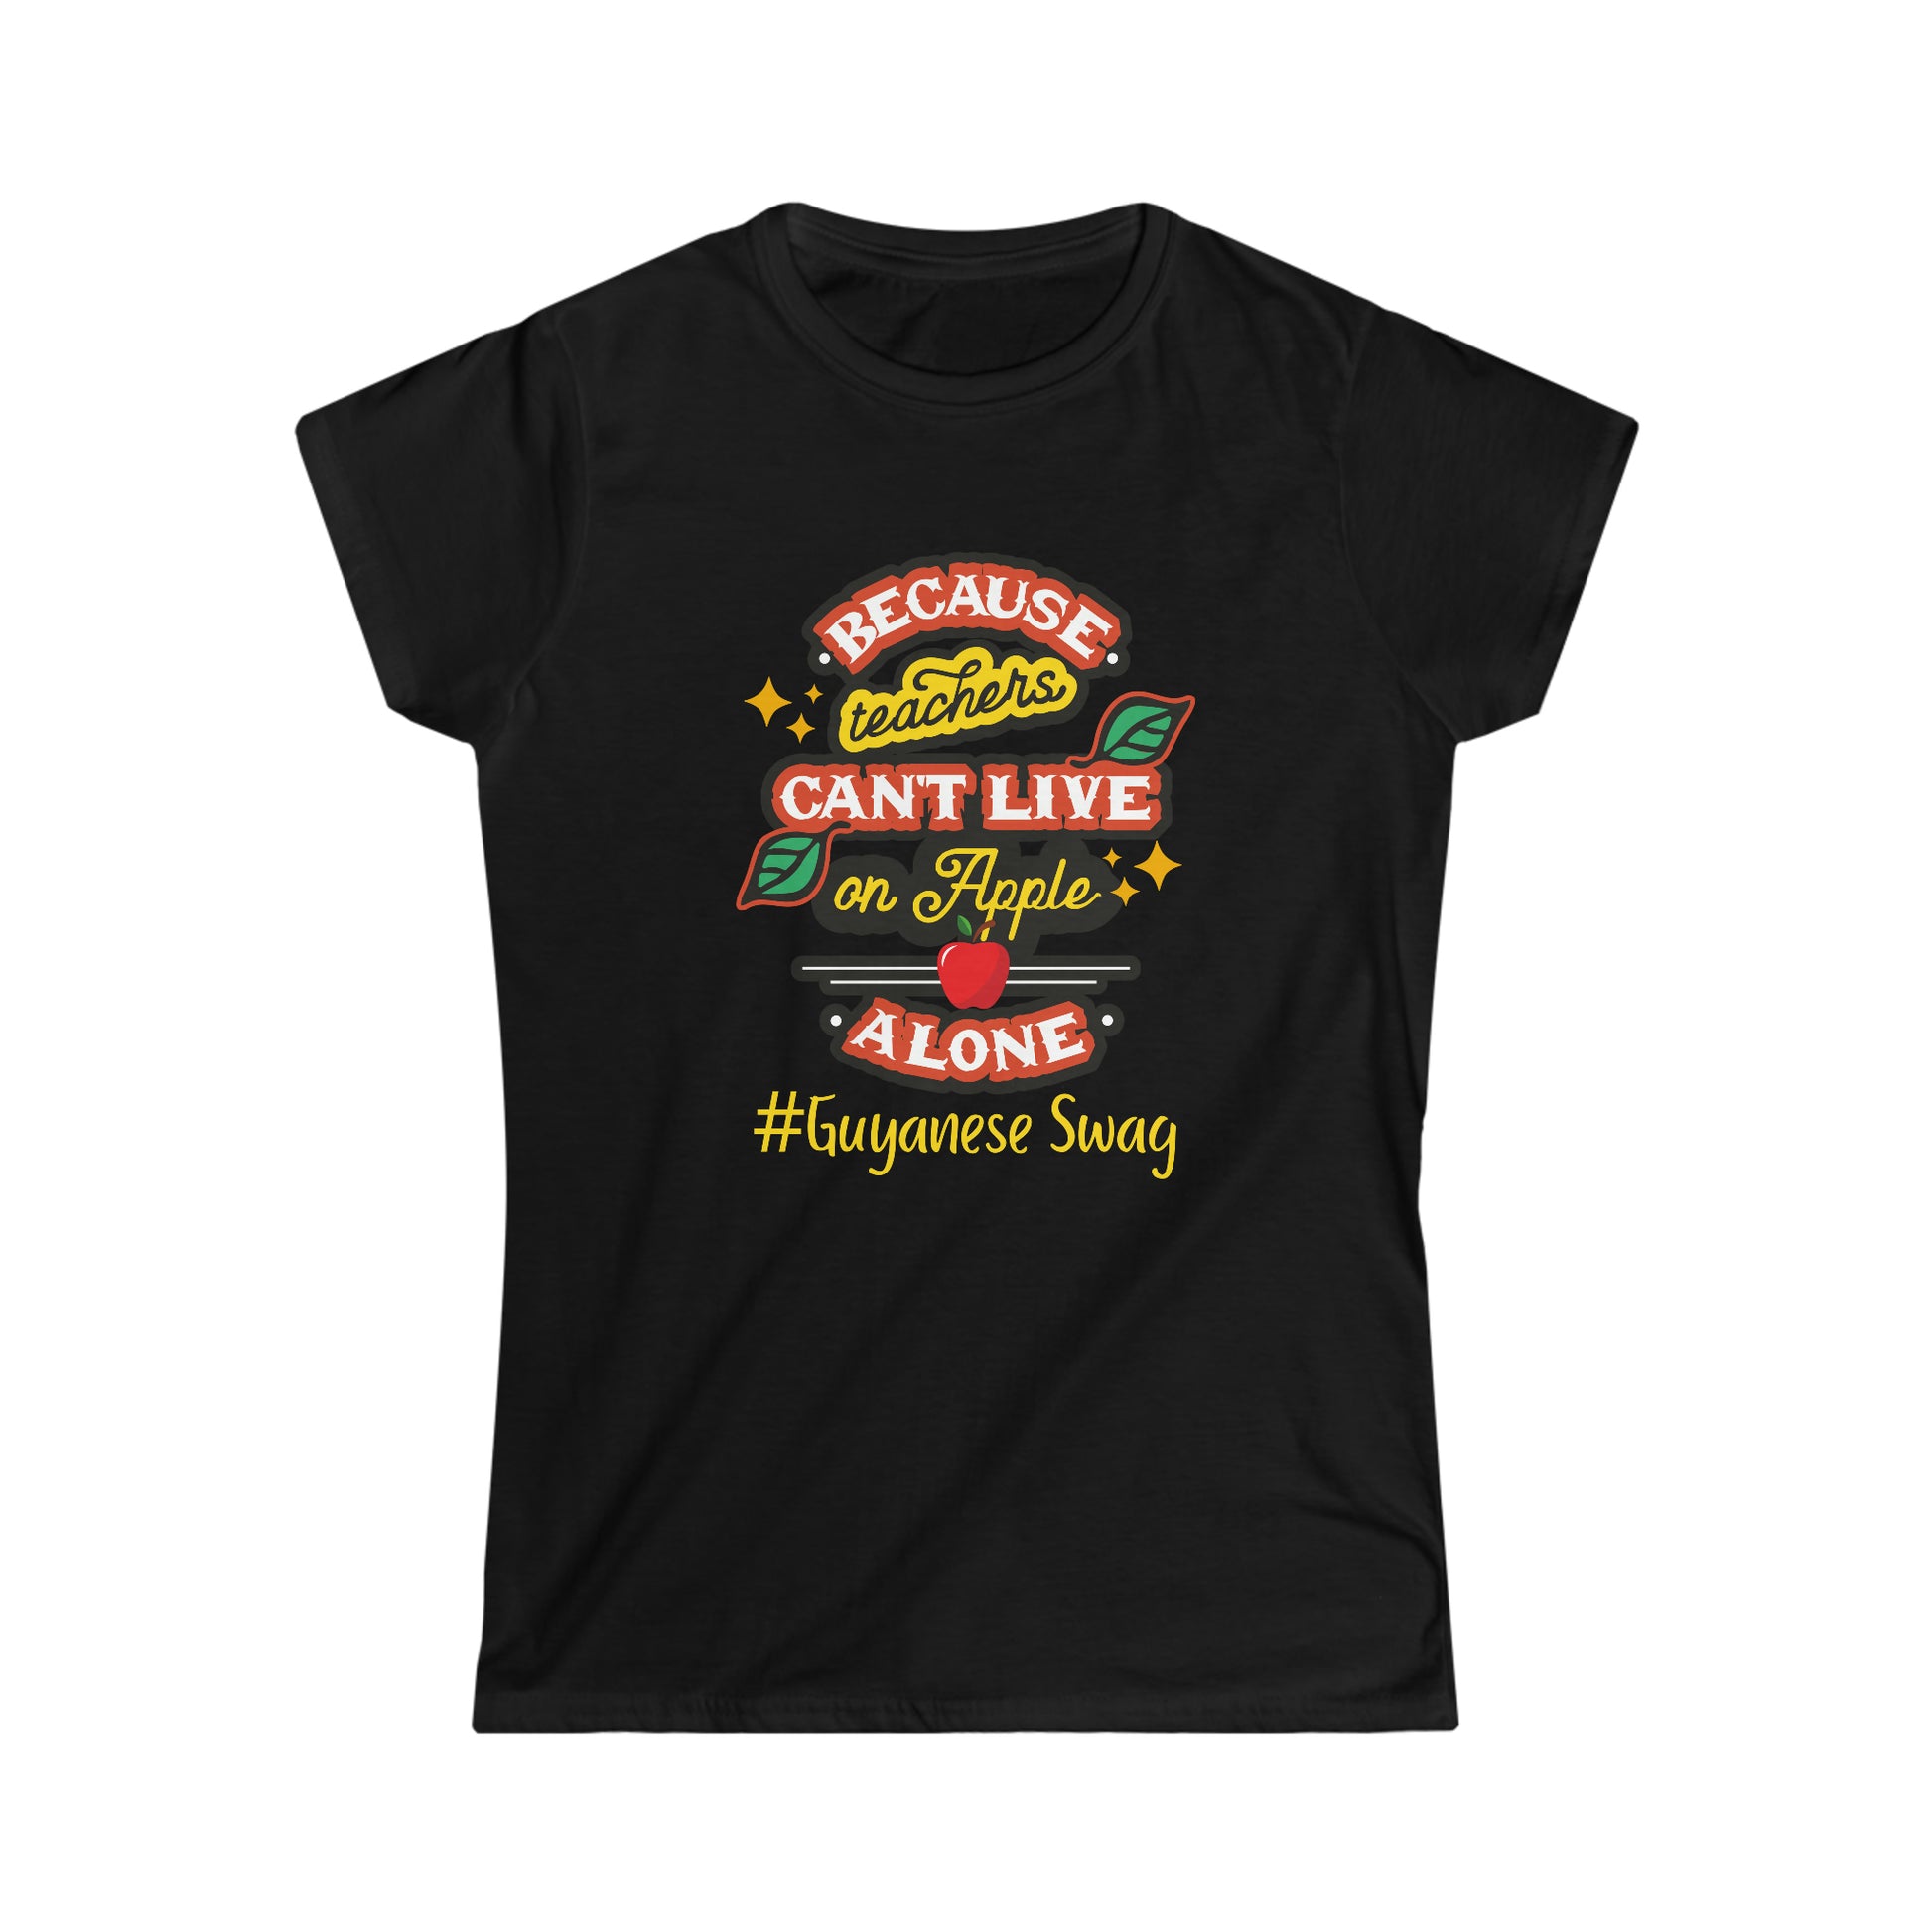 "Because Teachers Can't Live on Apples Alone" woman's black softstyle tee from Guyanese Swag.